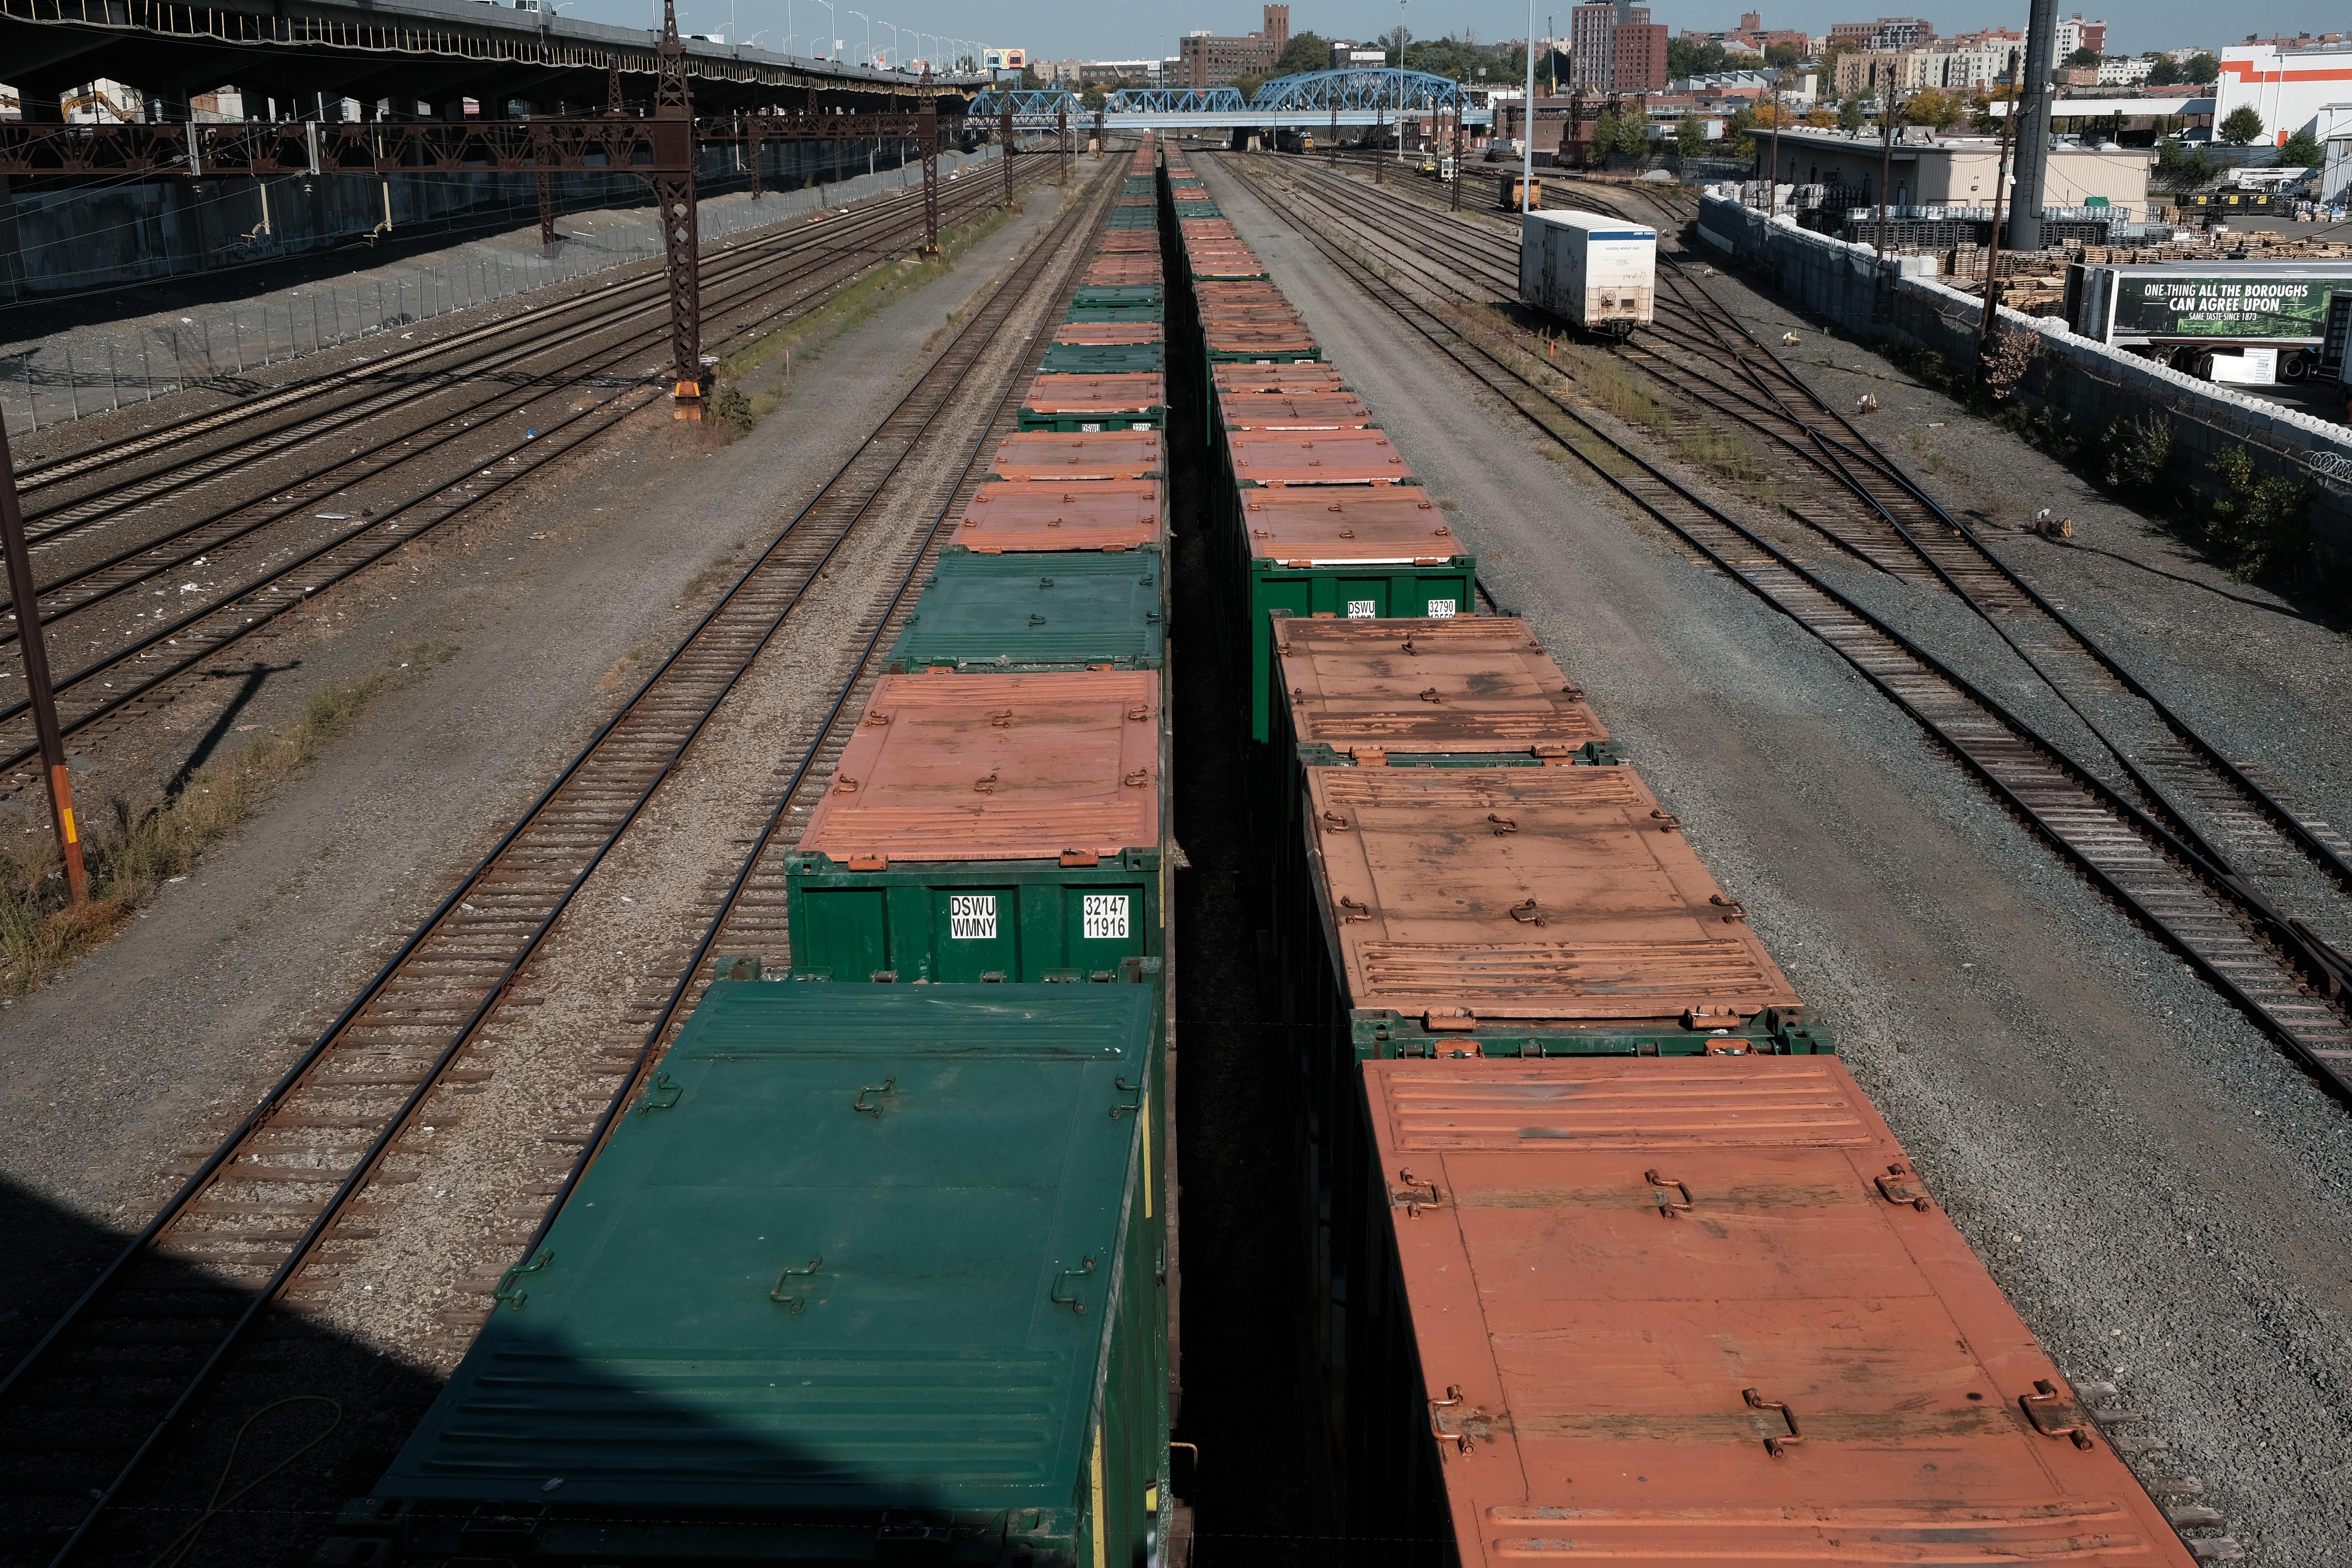 Trains sit at the CSX Oak Point Yard, a freight railroad yard on October 11, 2022 in the Bronx borough of New York City. The country's largest railroad unions announced that they have rejected its deal with freight railroads. The union has said the deal doesn't do enough to address the lack of paid sick time or improve working conditions. (Photo by Spencer Platt/Getty Images)